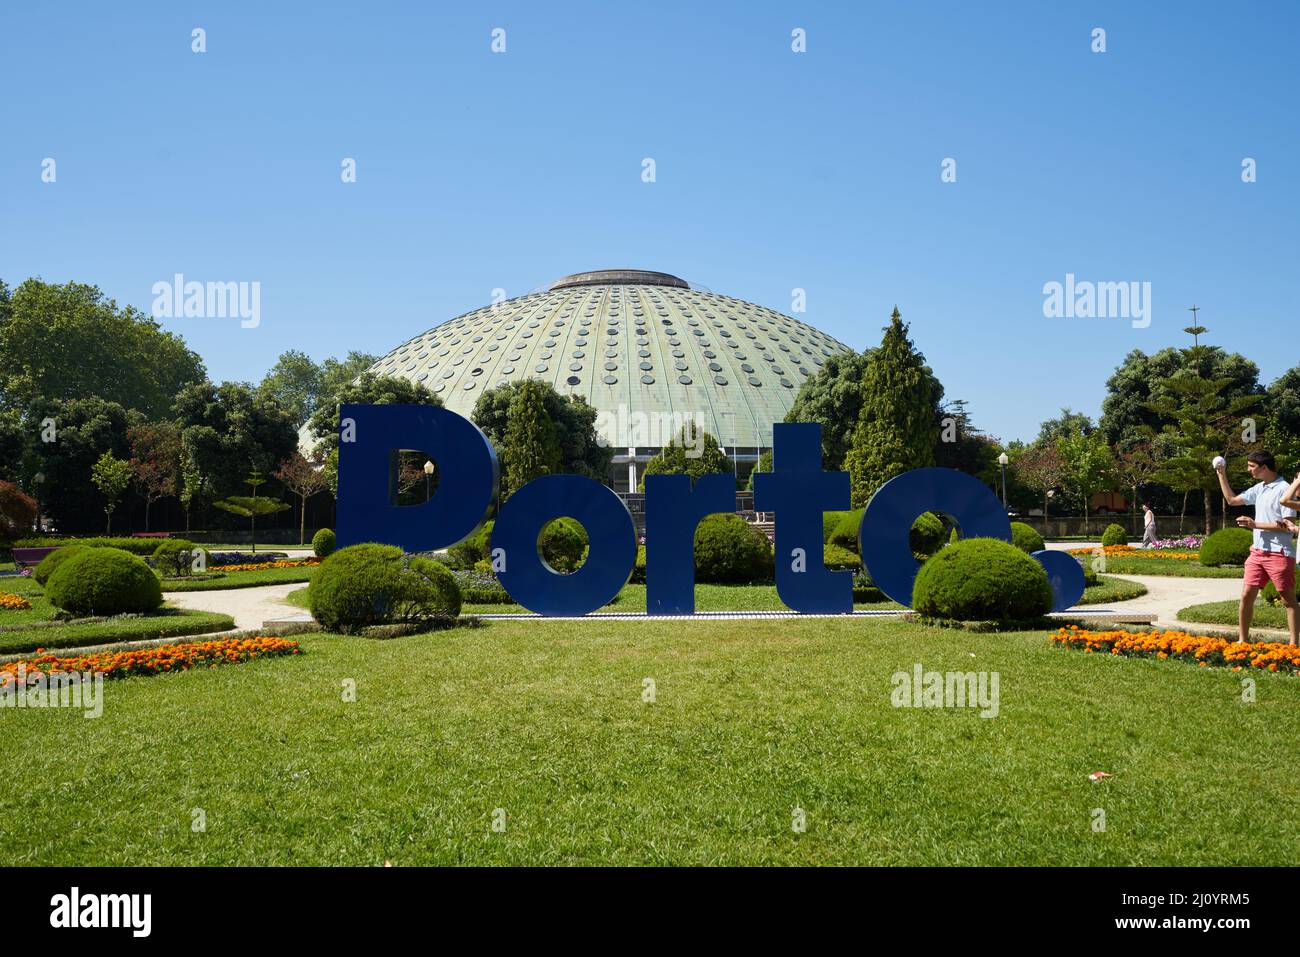 Garden Crystal Palace Porto flowers in Portugal Stock Photo